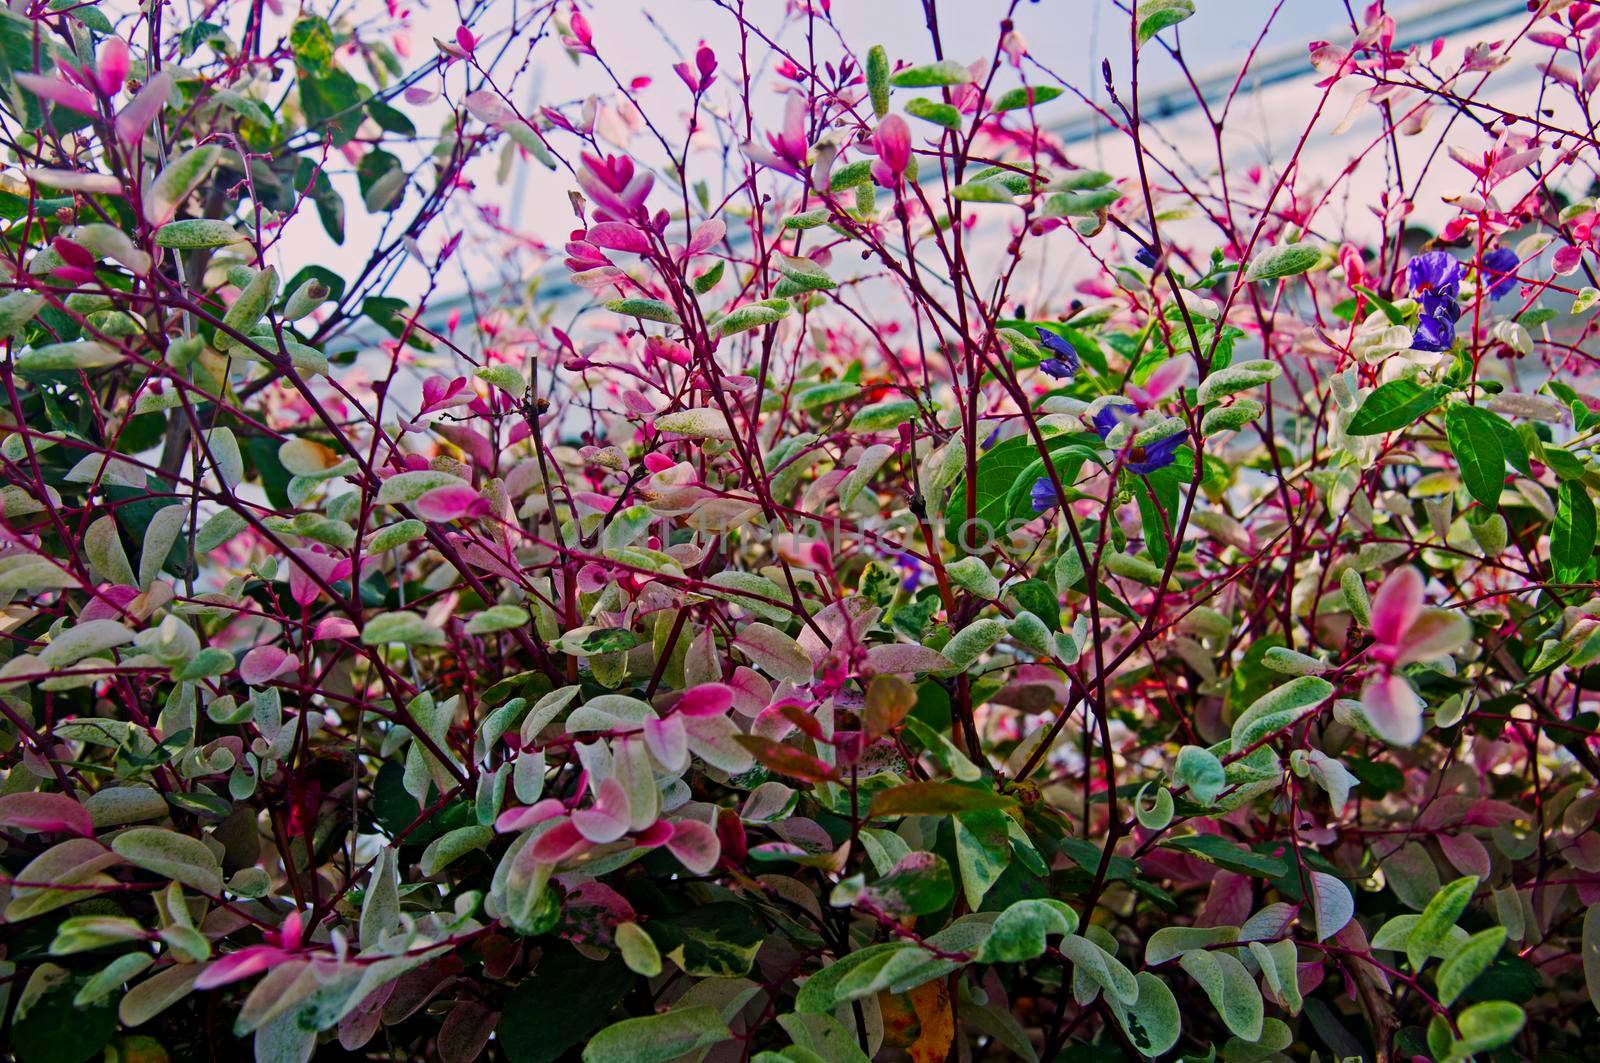 Bushes of plant with green and pink small leaves, summer time